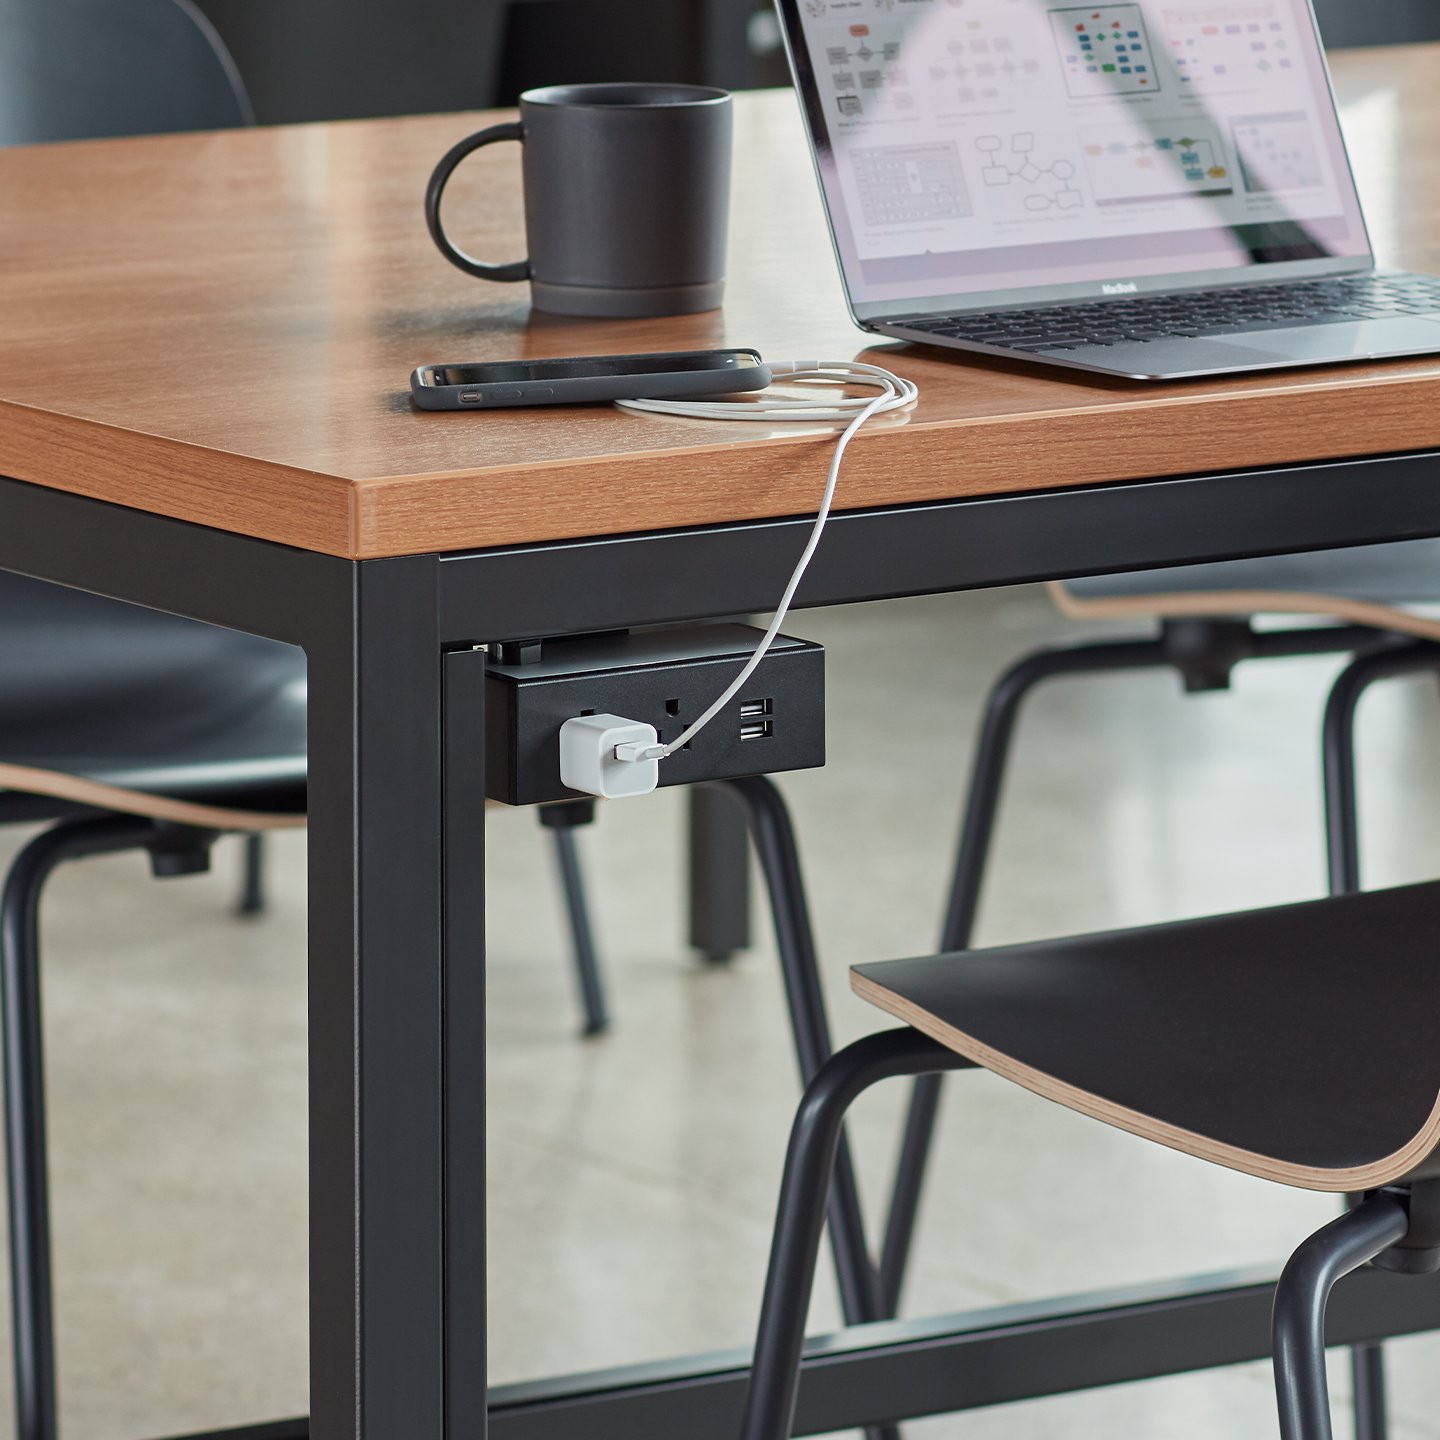 Haworth Workstation Power Solutions Accessories attached to the bottom of the desk in black color with phone plugged into usb port with laptop and coffee on desk